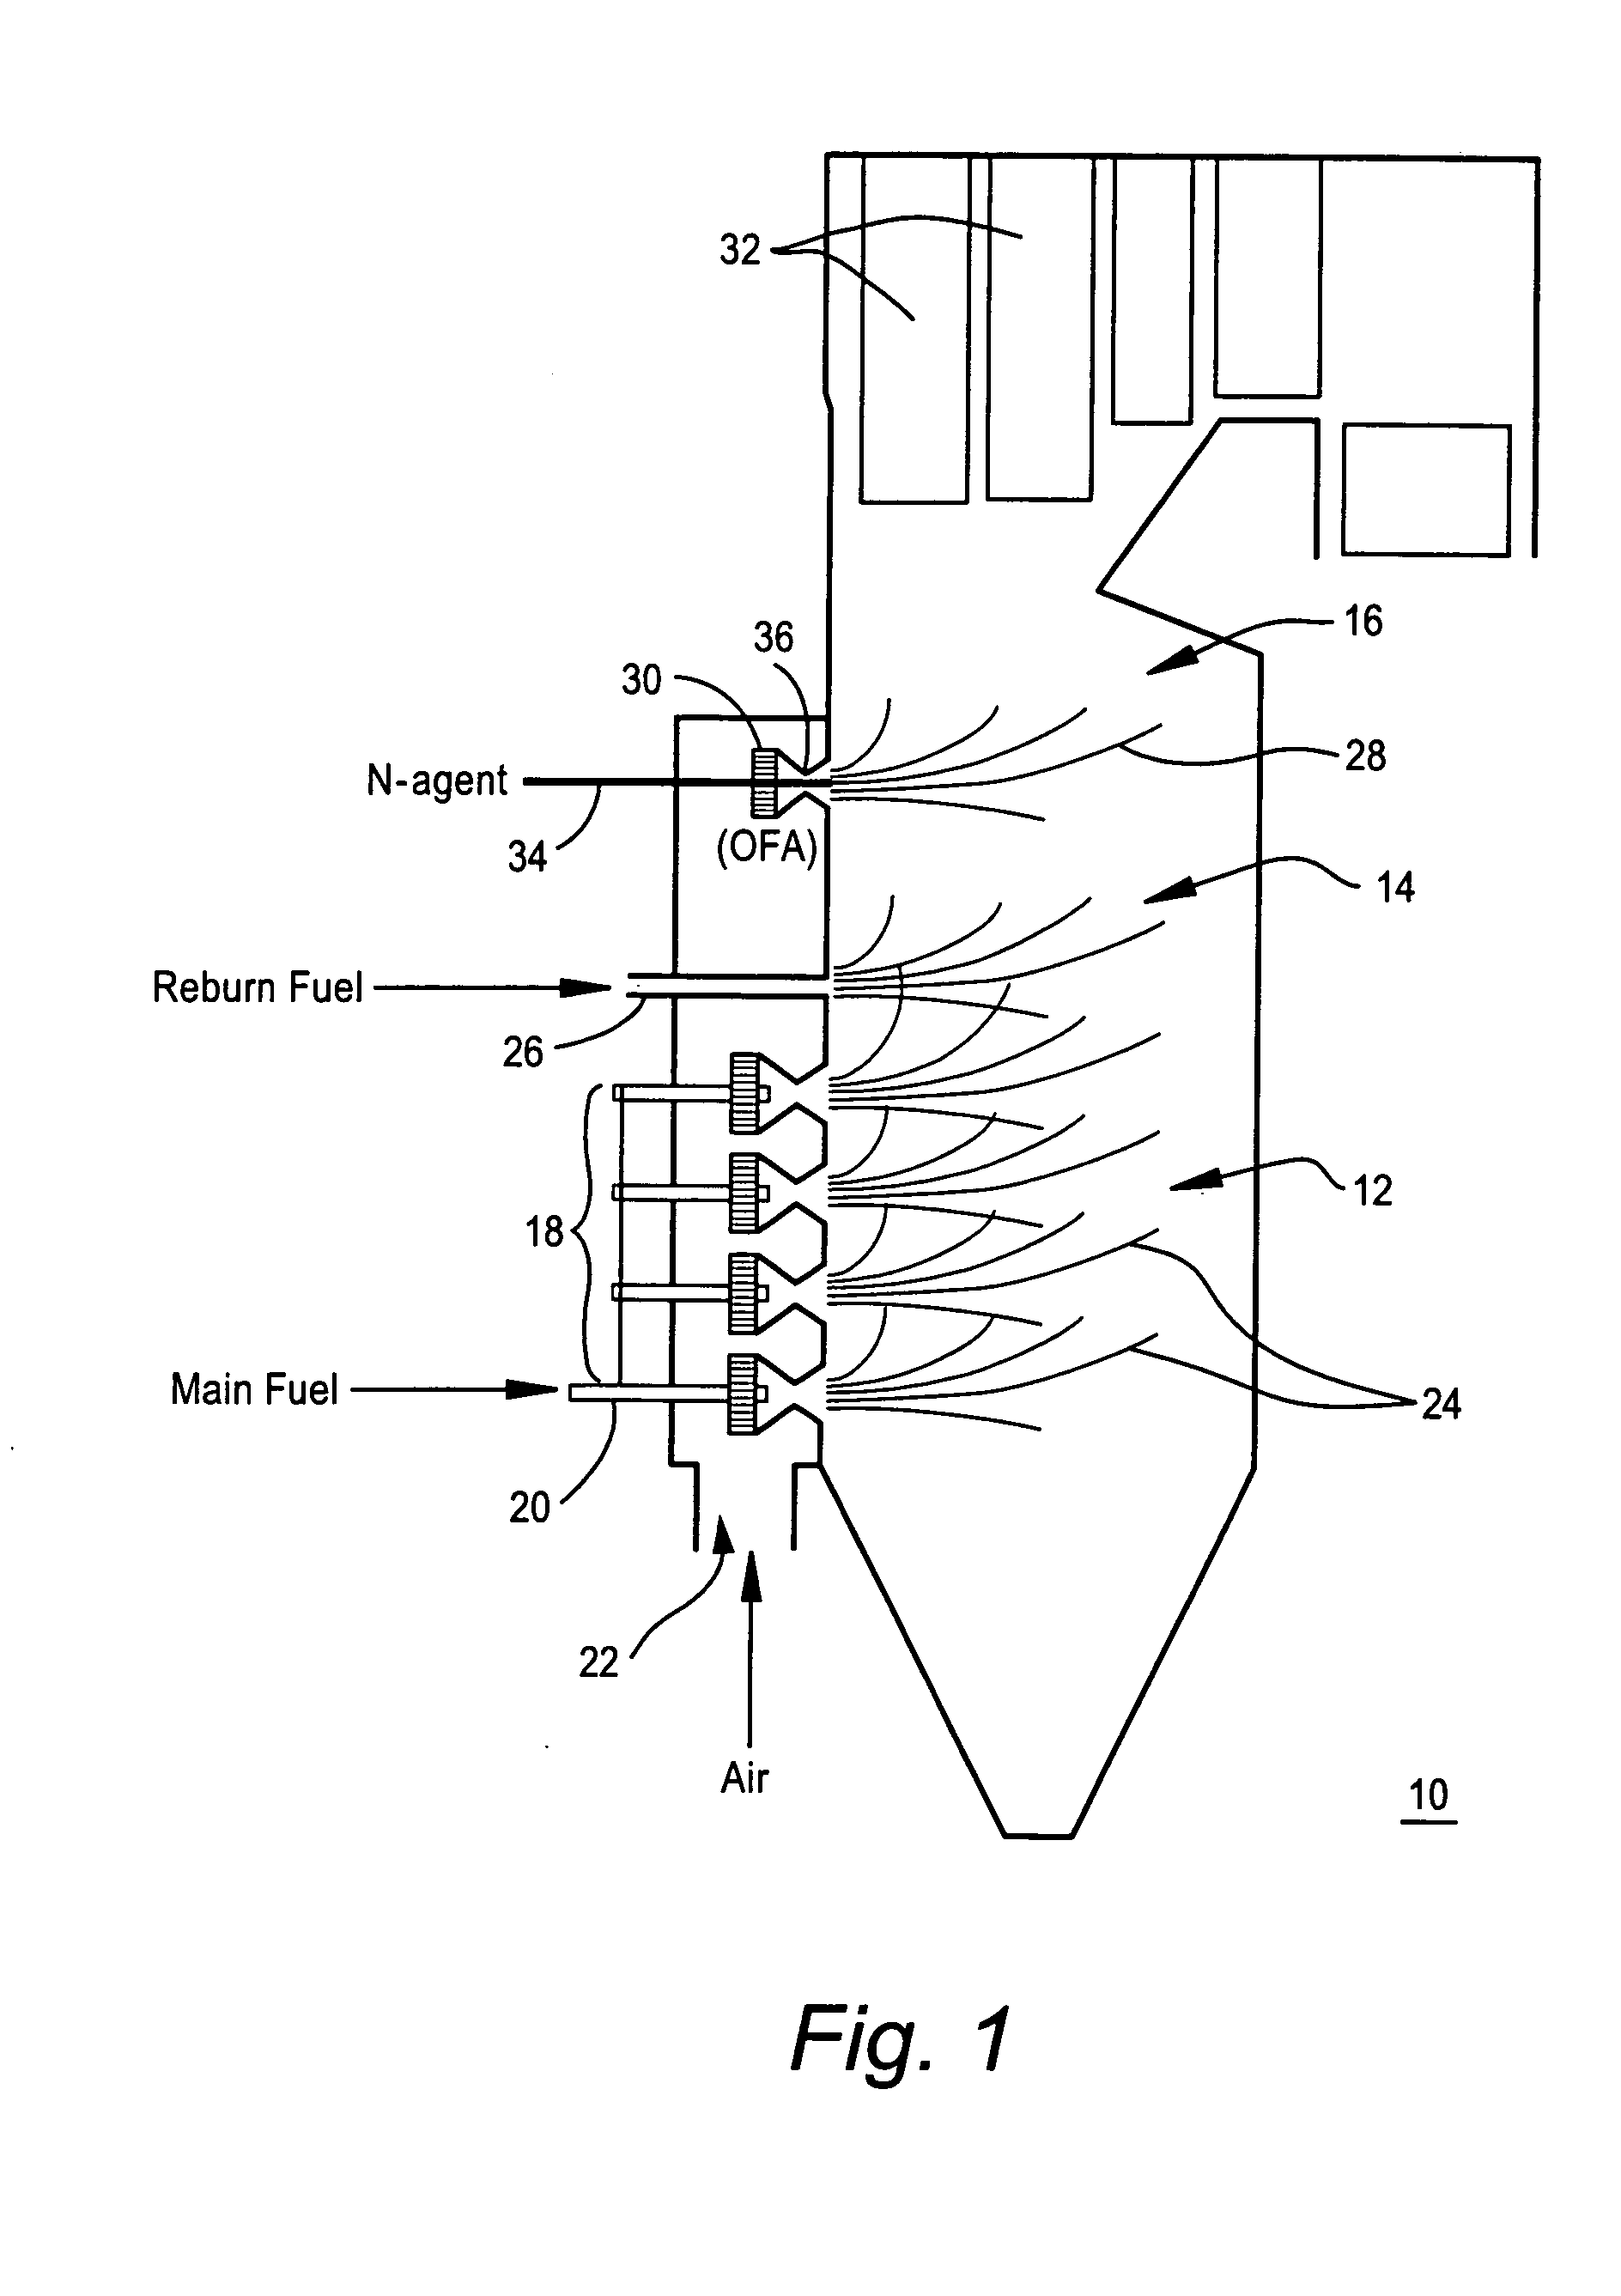 Method and apparatus to reduce flue gas NOx by injection of n-agent droplets and gas in overfire air